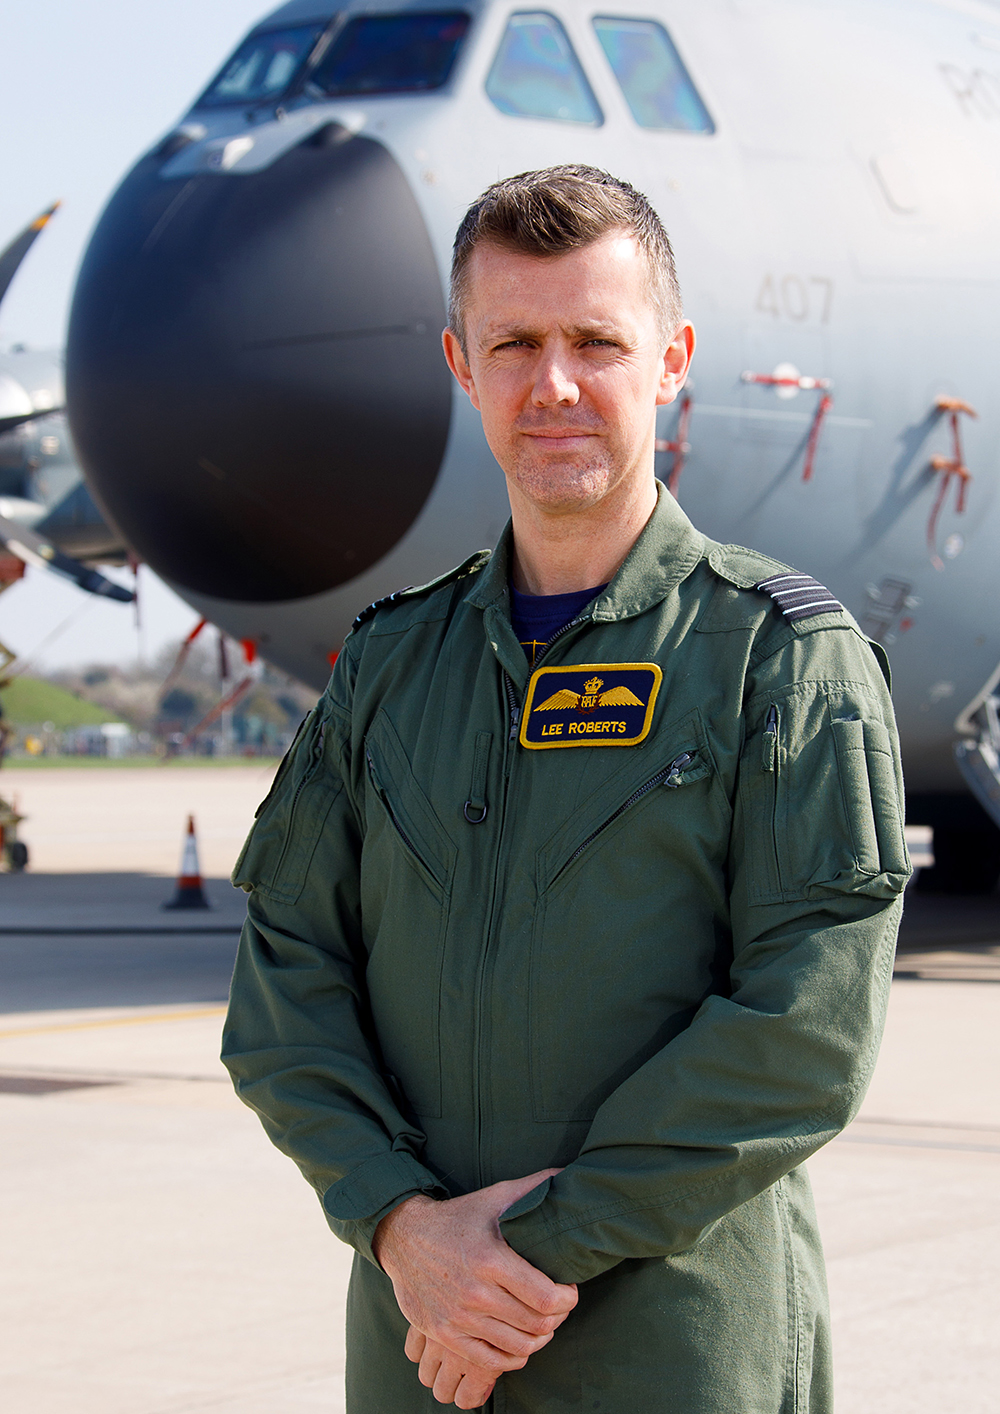 Wing Commander Lee Roberts, the new Officer Commanding LXX Squadron